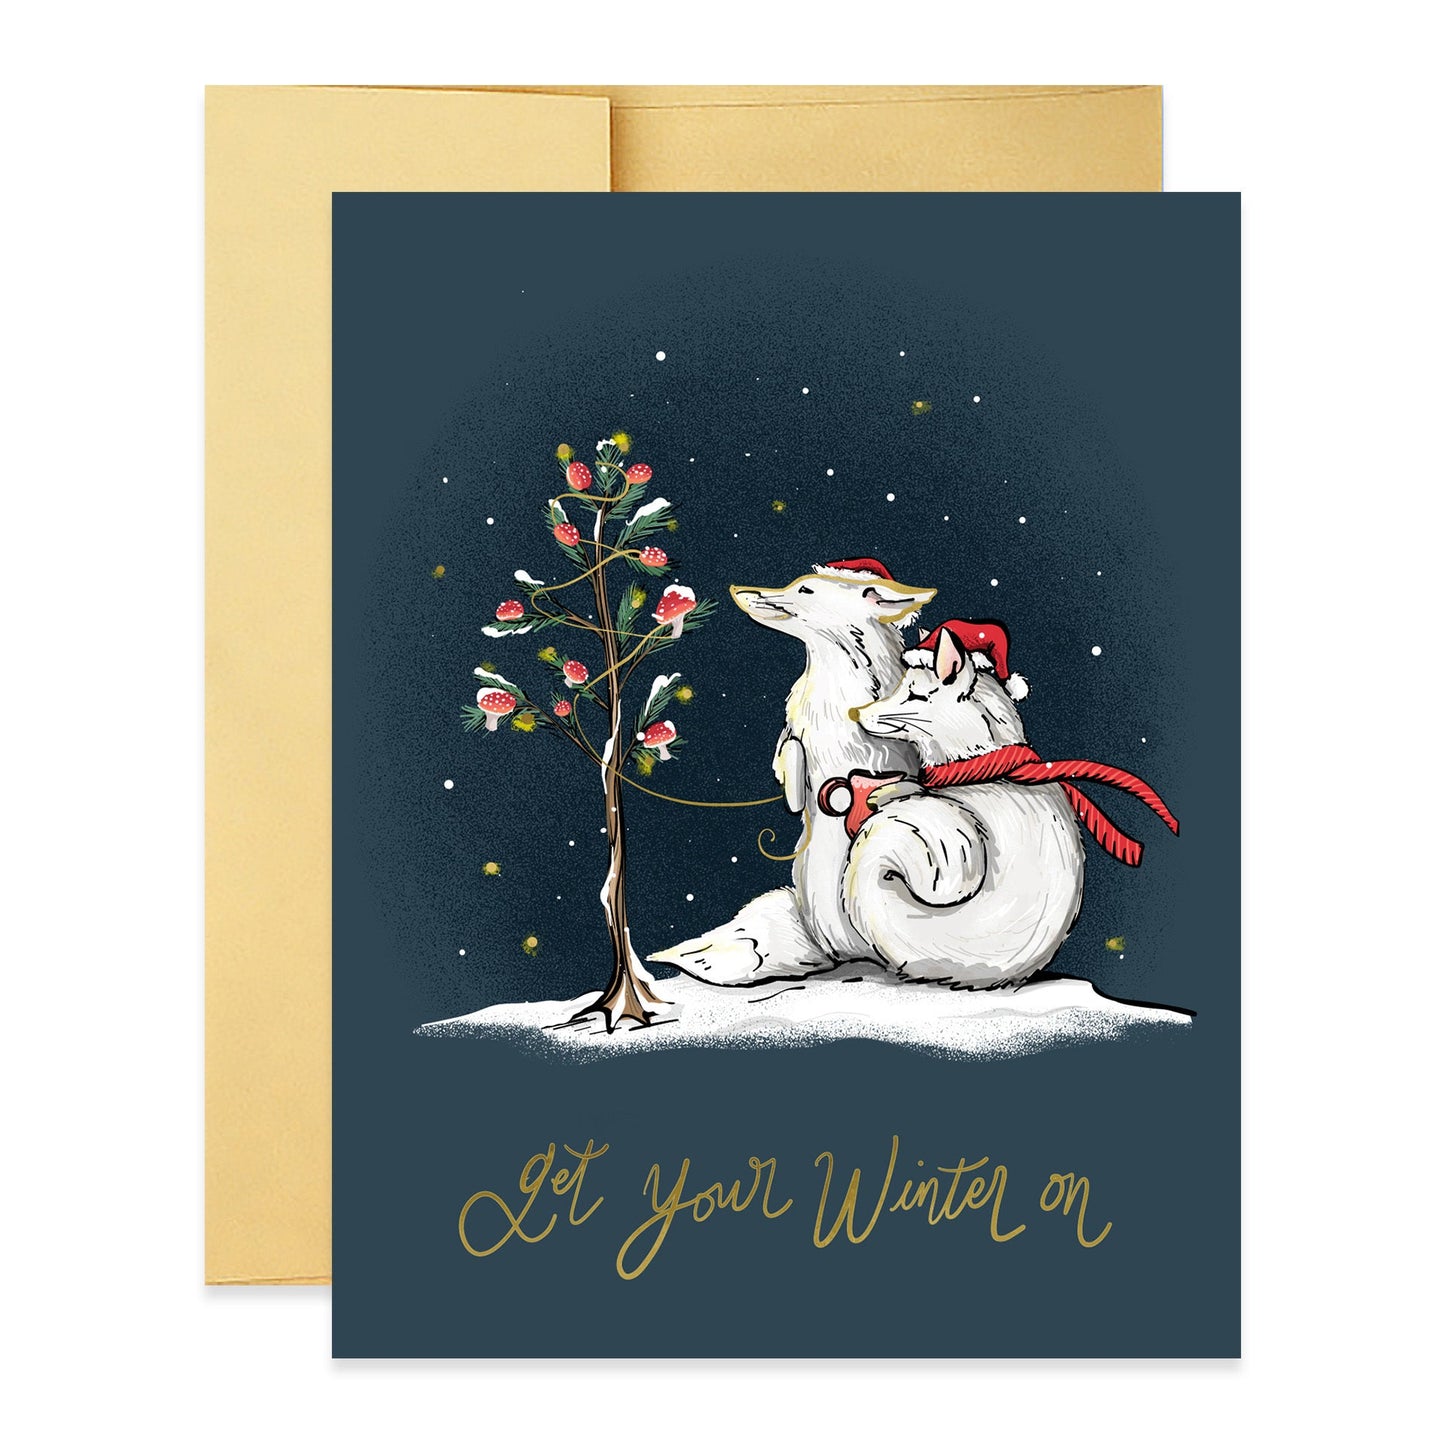 Get Your Winter On Card